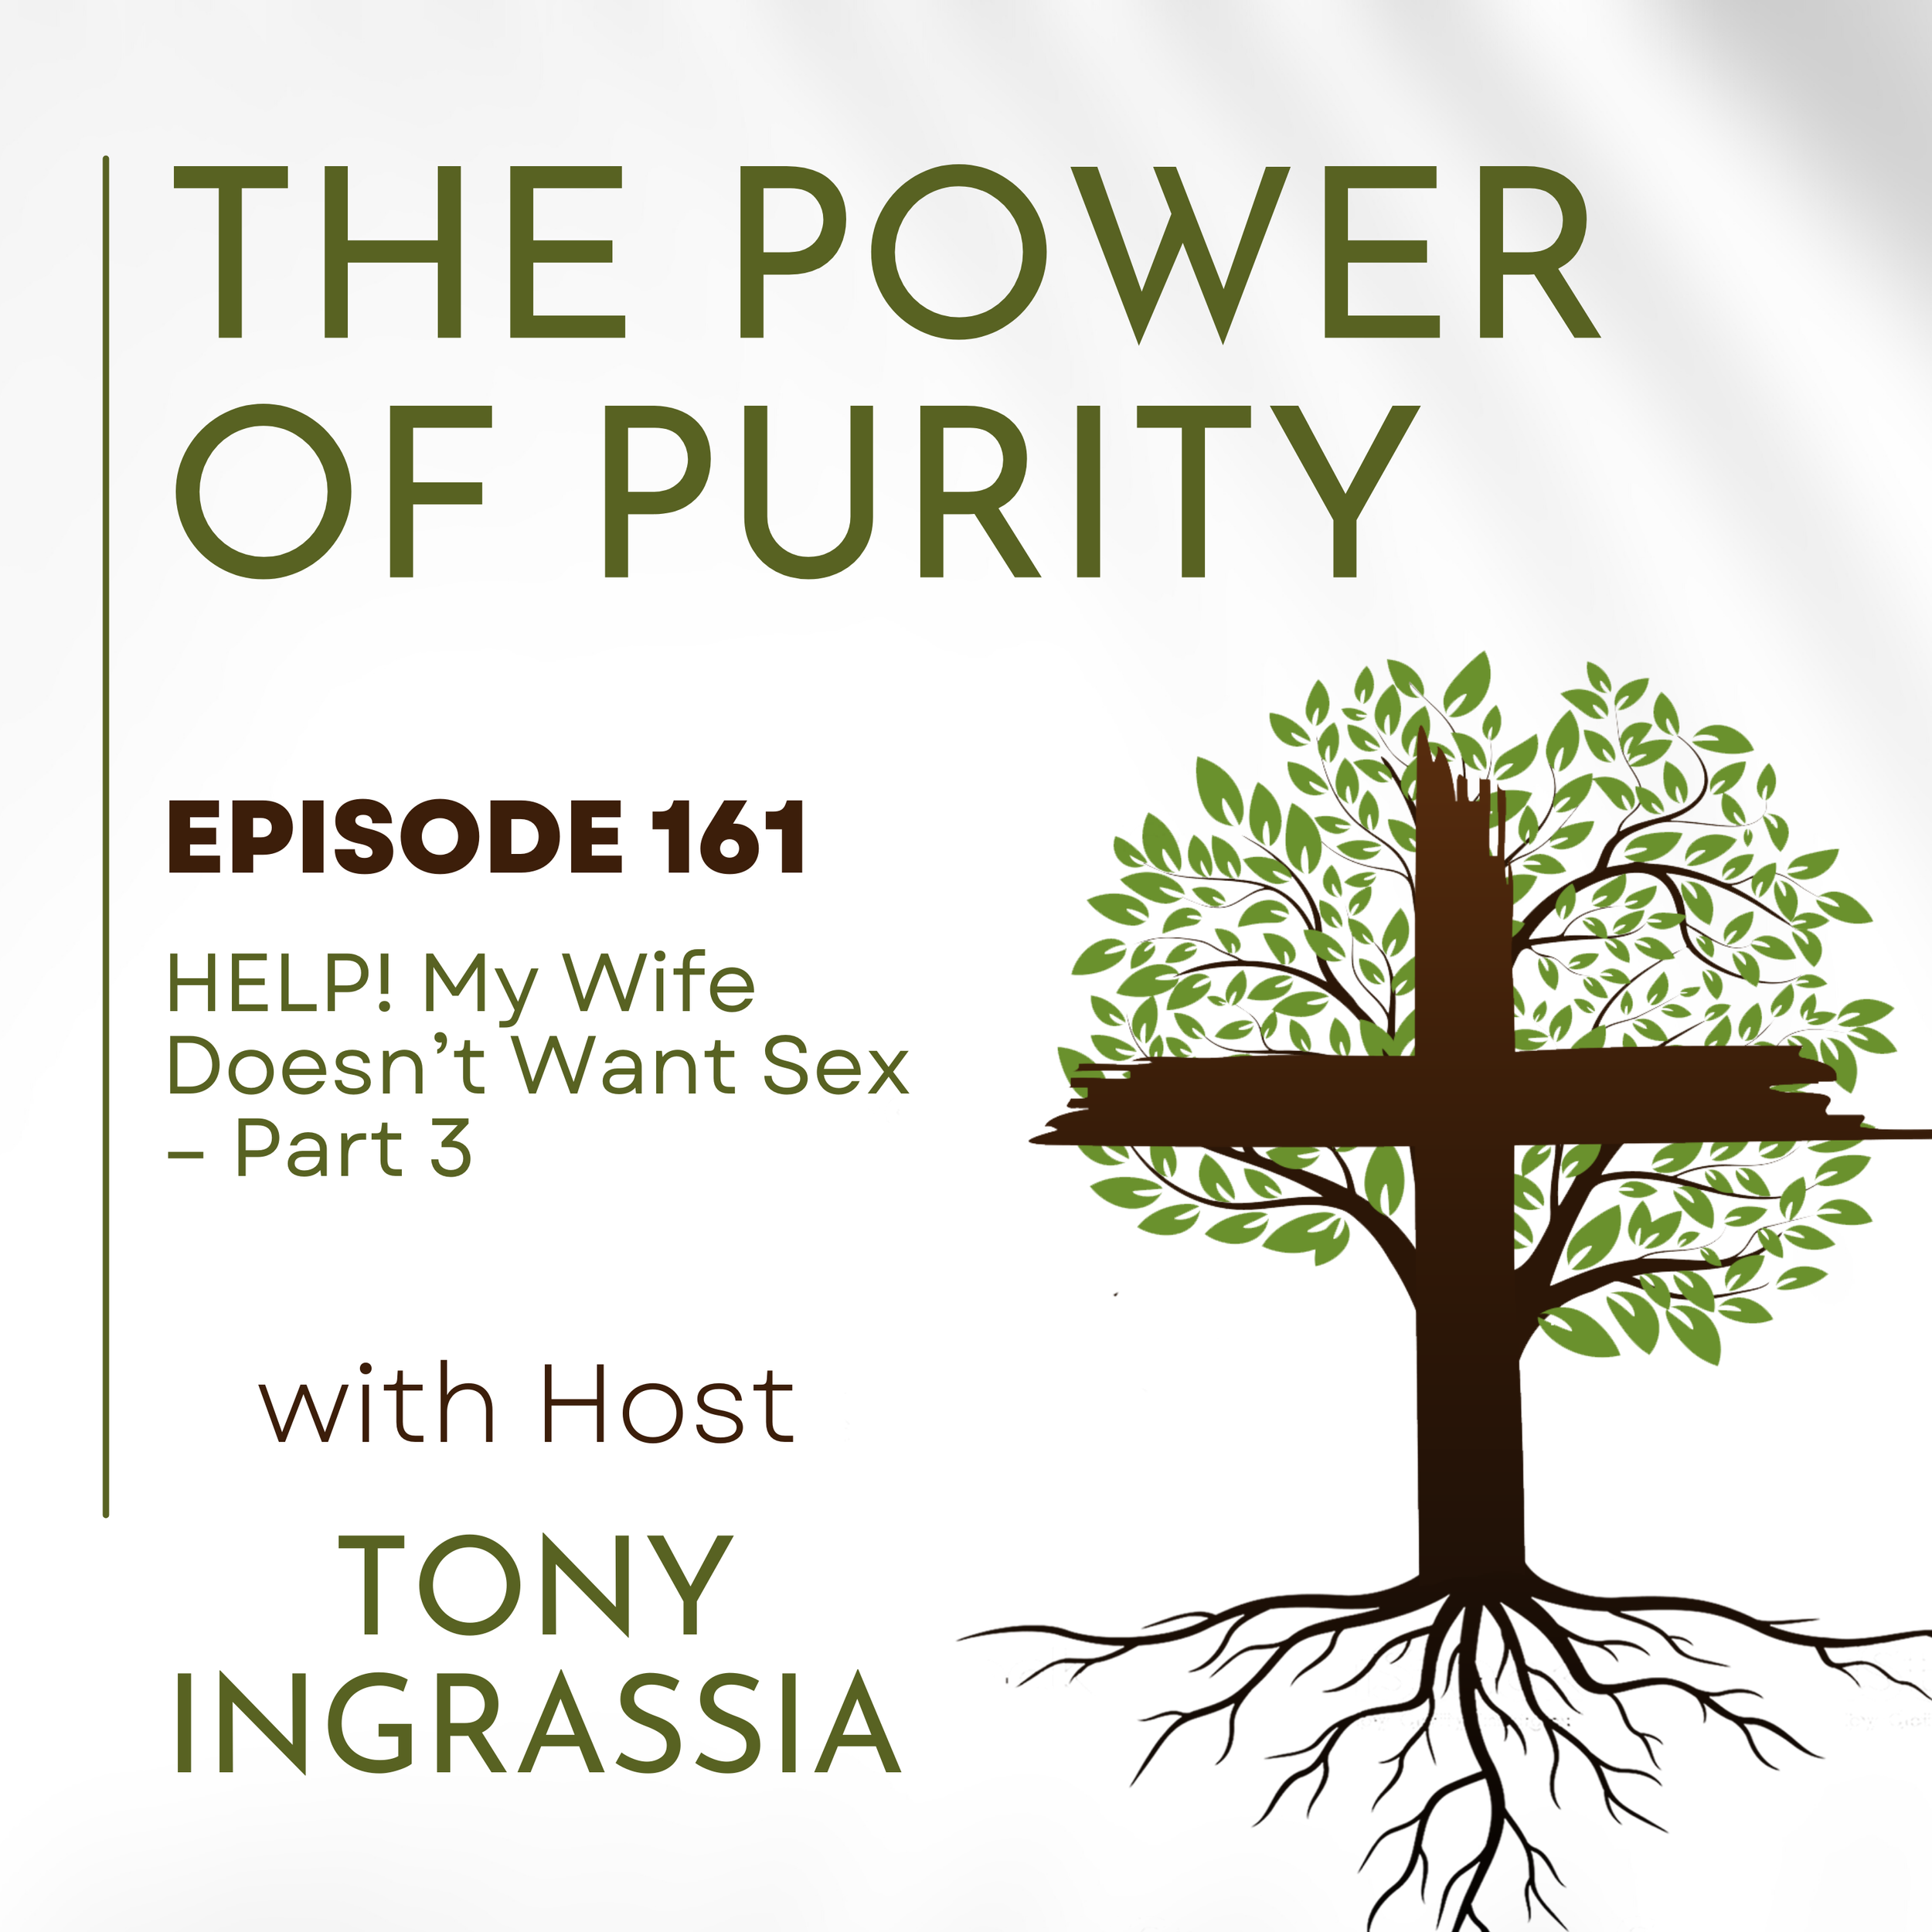 The Power of Purity Podcast, Episode 161 - HELP! My Wife Doesnt Want